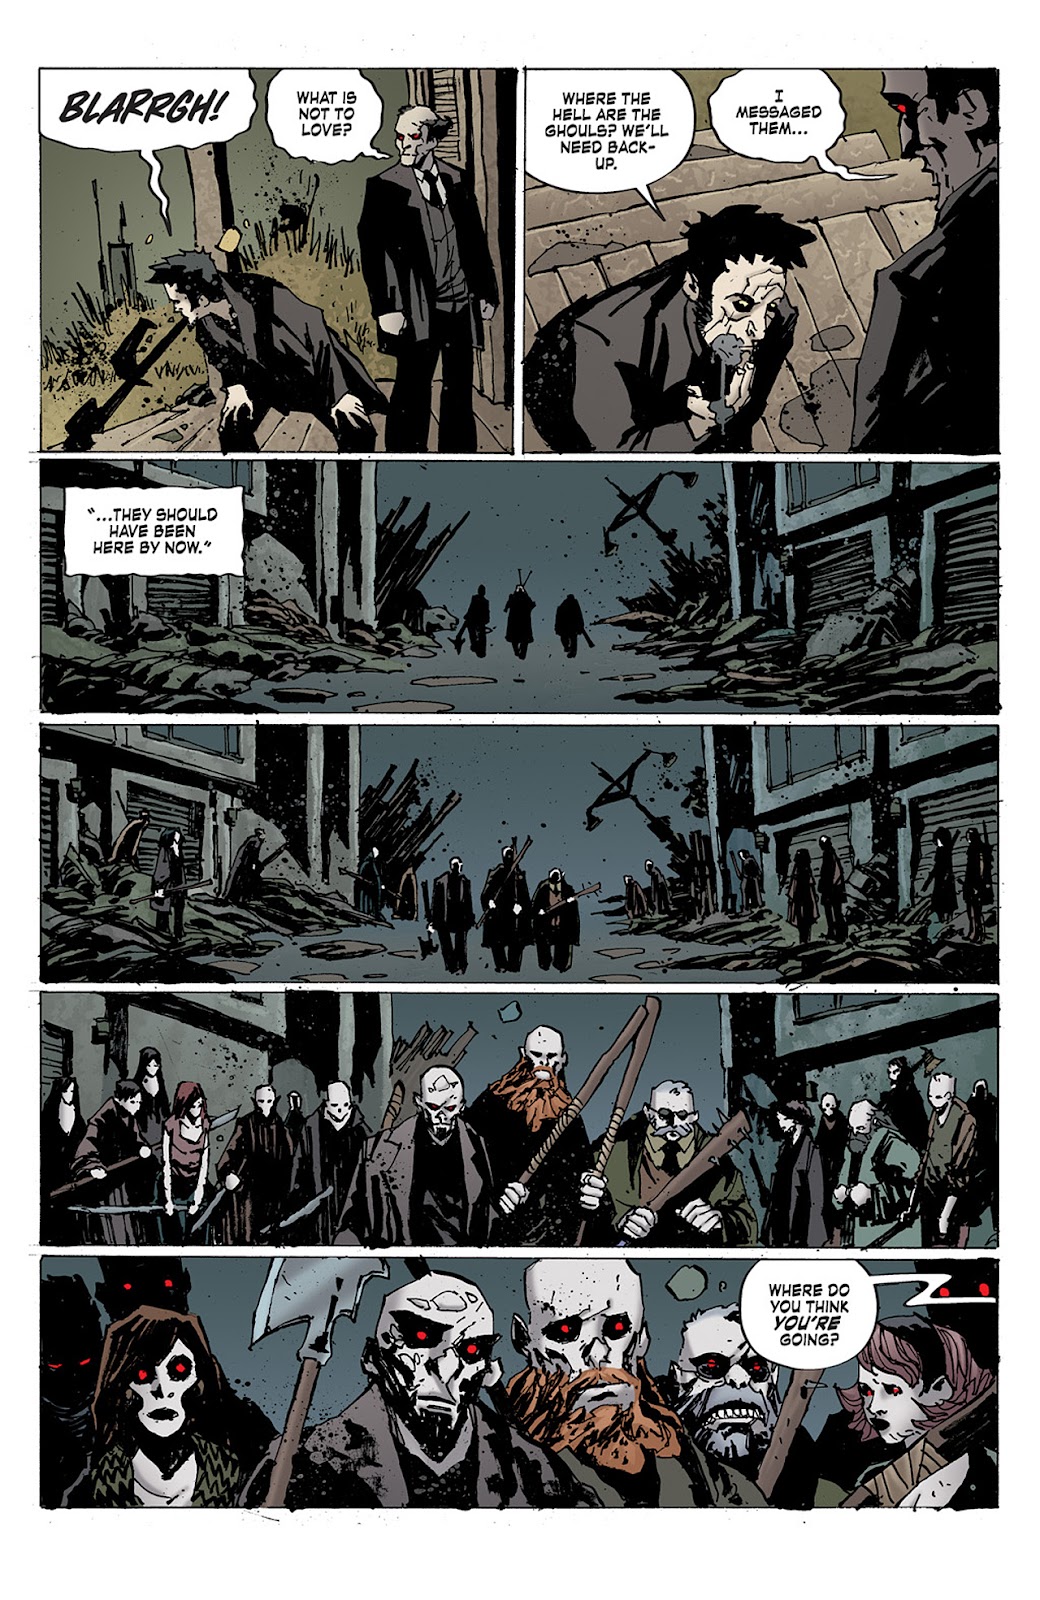 Criminal Macabre: Final Night - The 30 Days of Night Crossover issue 3 - Page 8